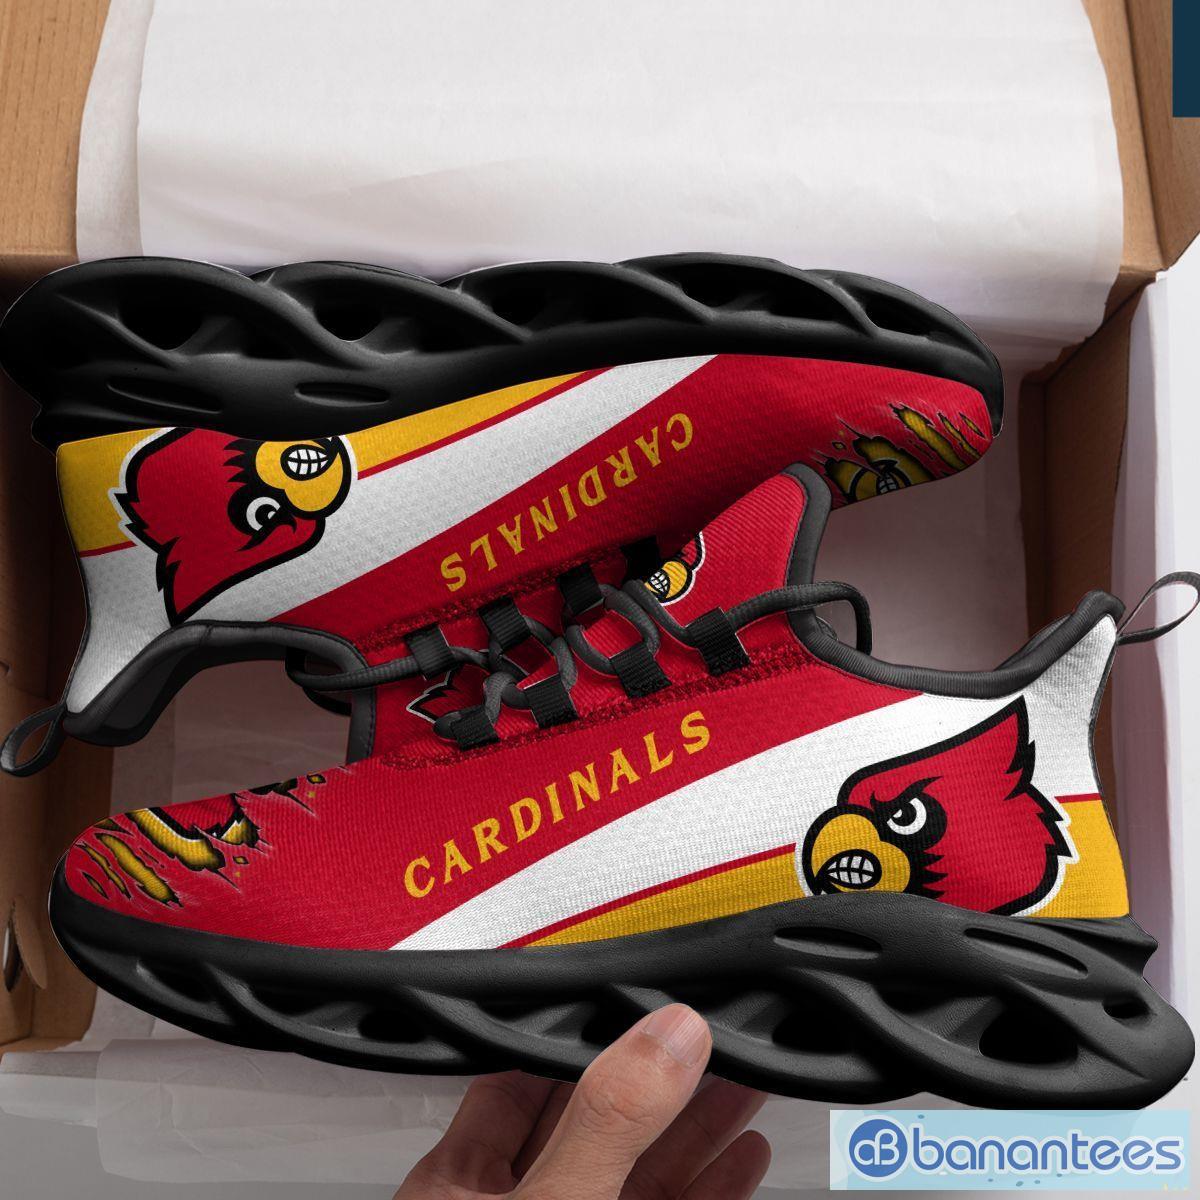 louisville basketball shoes